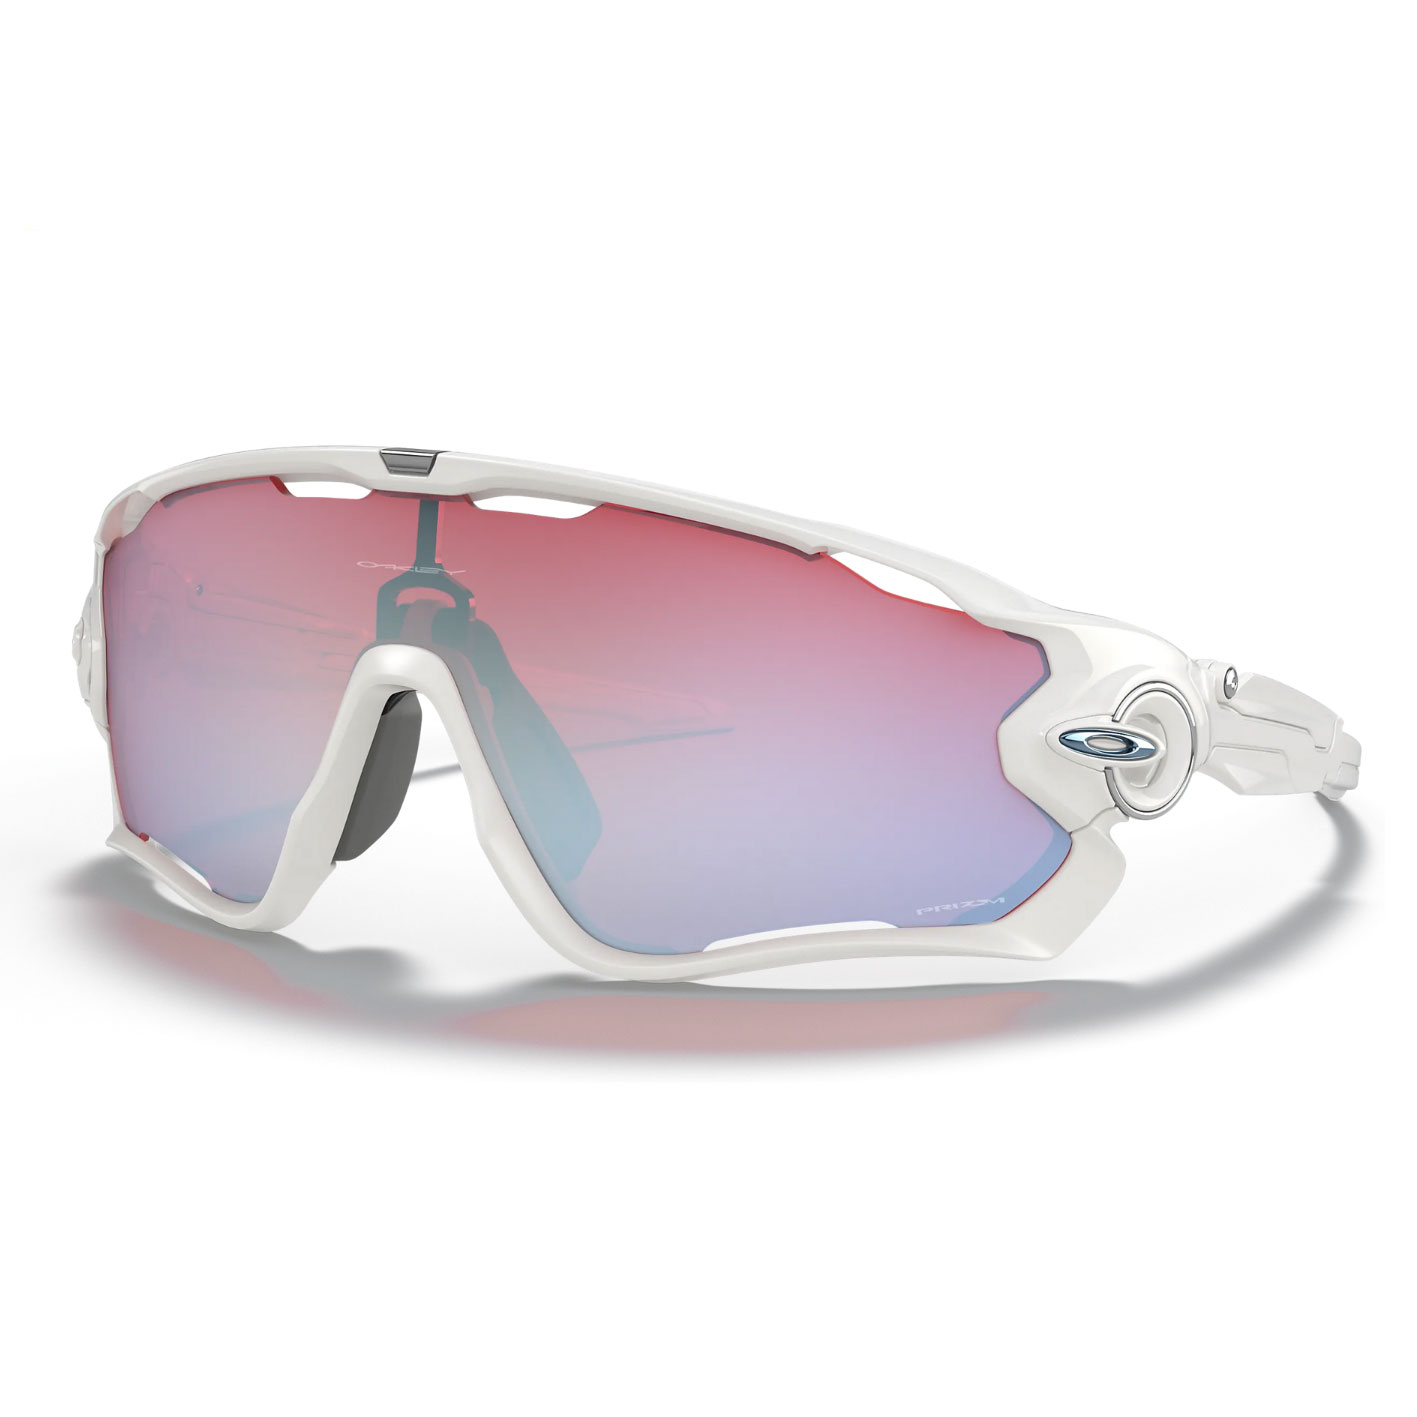 Productfoto van Oakley Jawbreaker Bril - Snow Collection - Polished White/Prizm Snow Sapphire - OO9290-2131